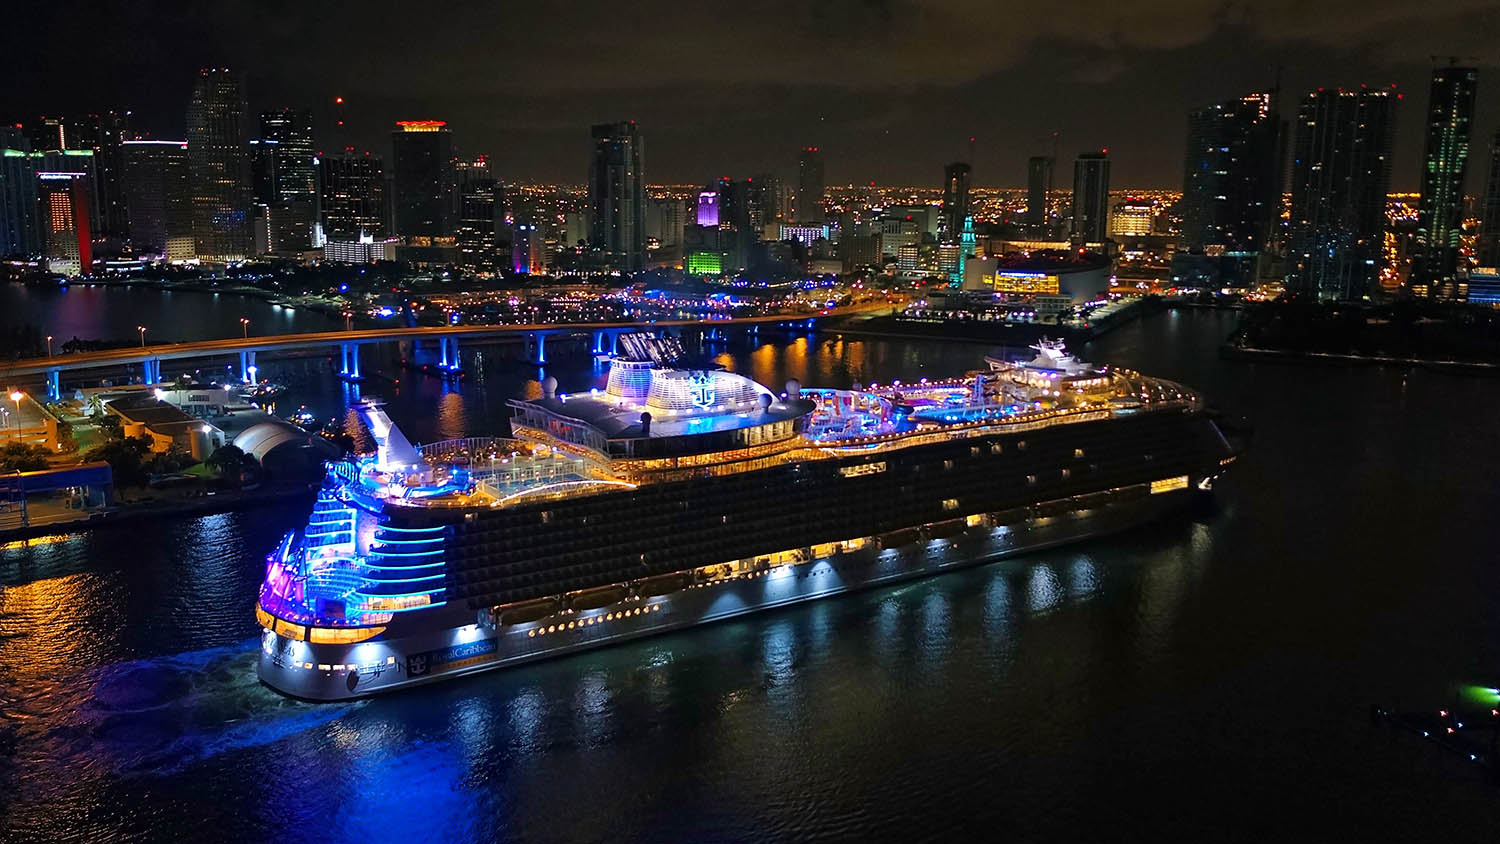 World's Largest Cruise Ship Arrives in Her Homeport of Miami